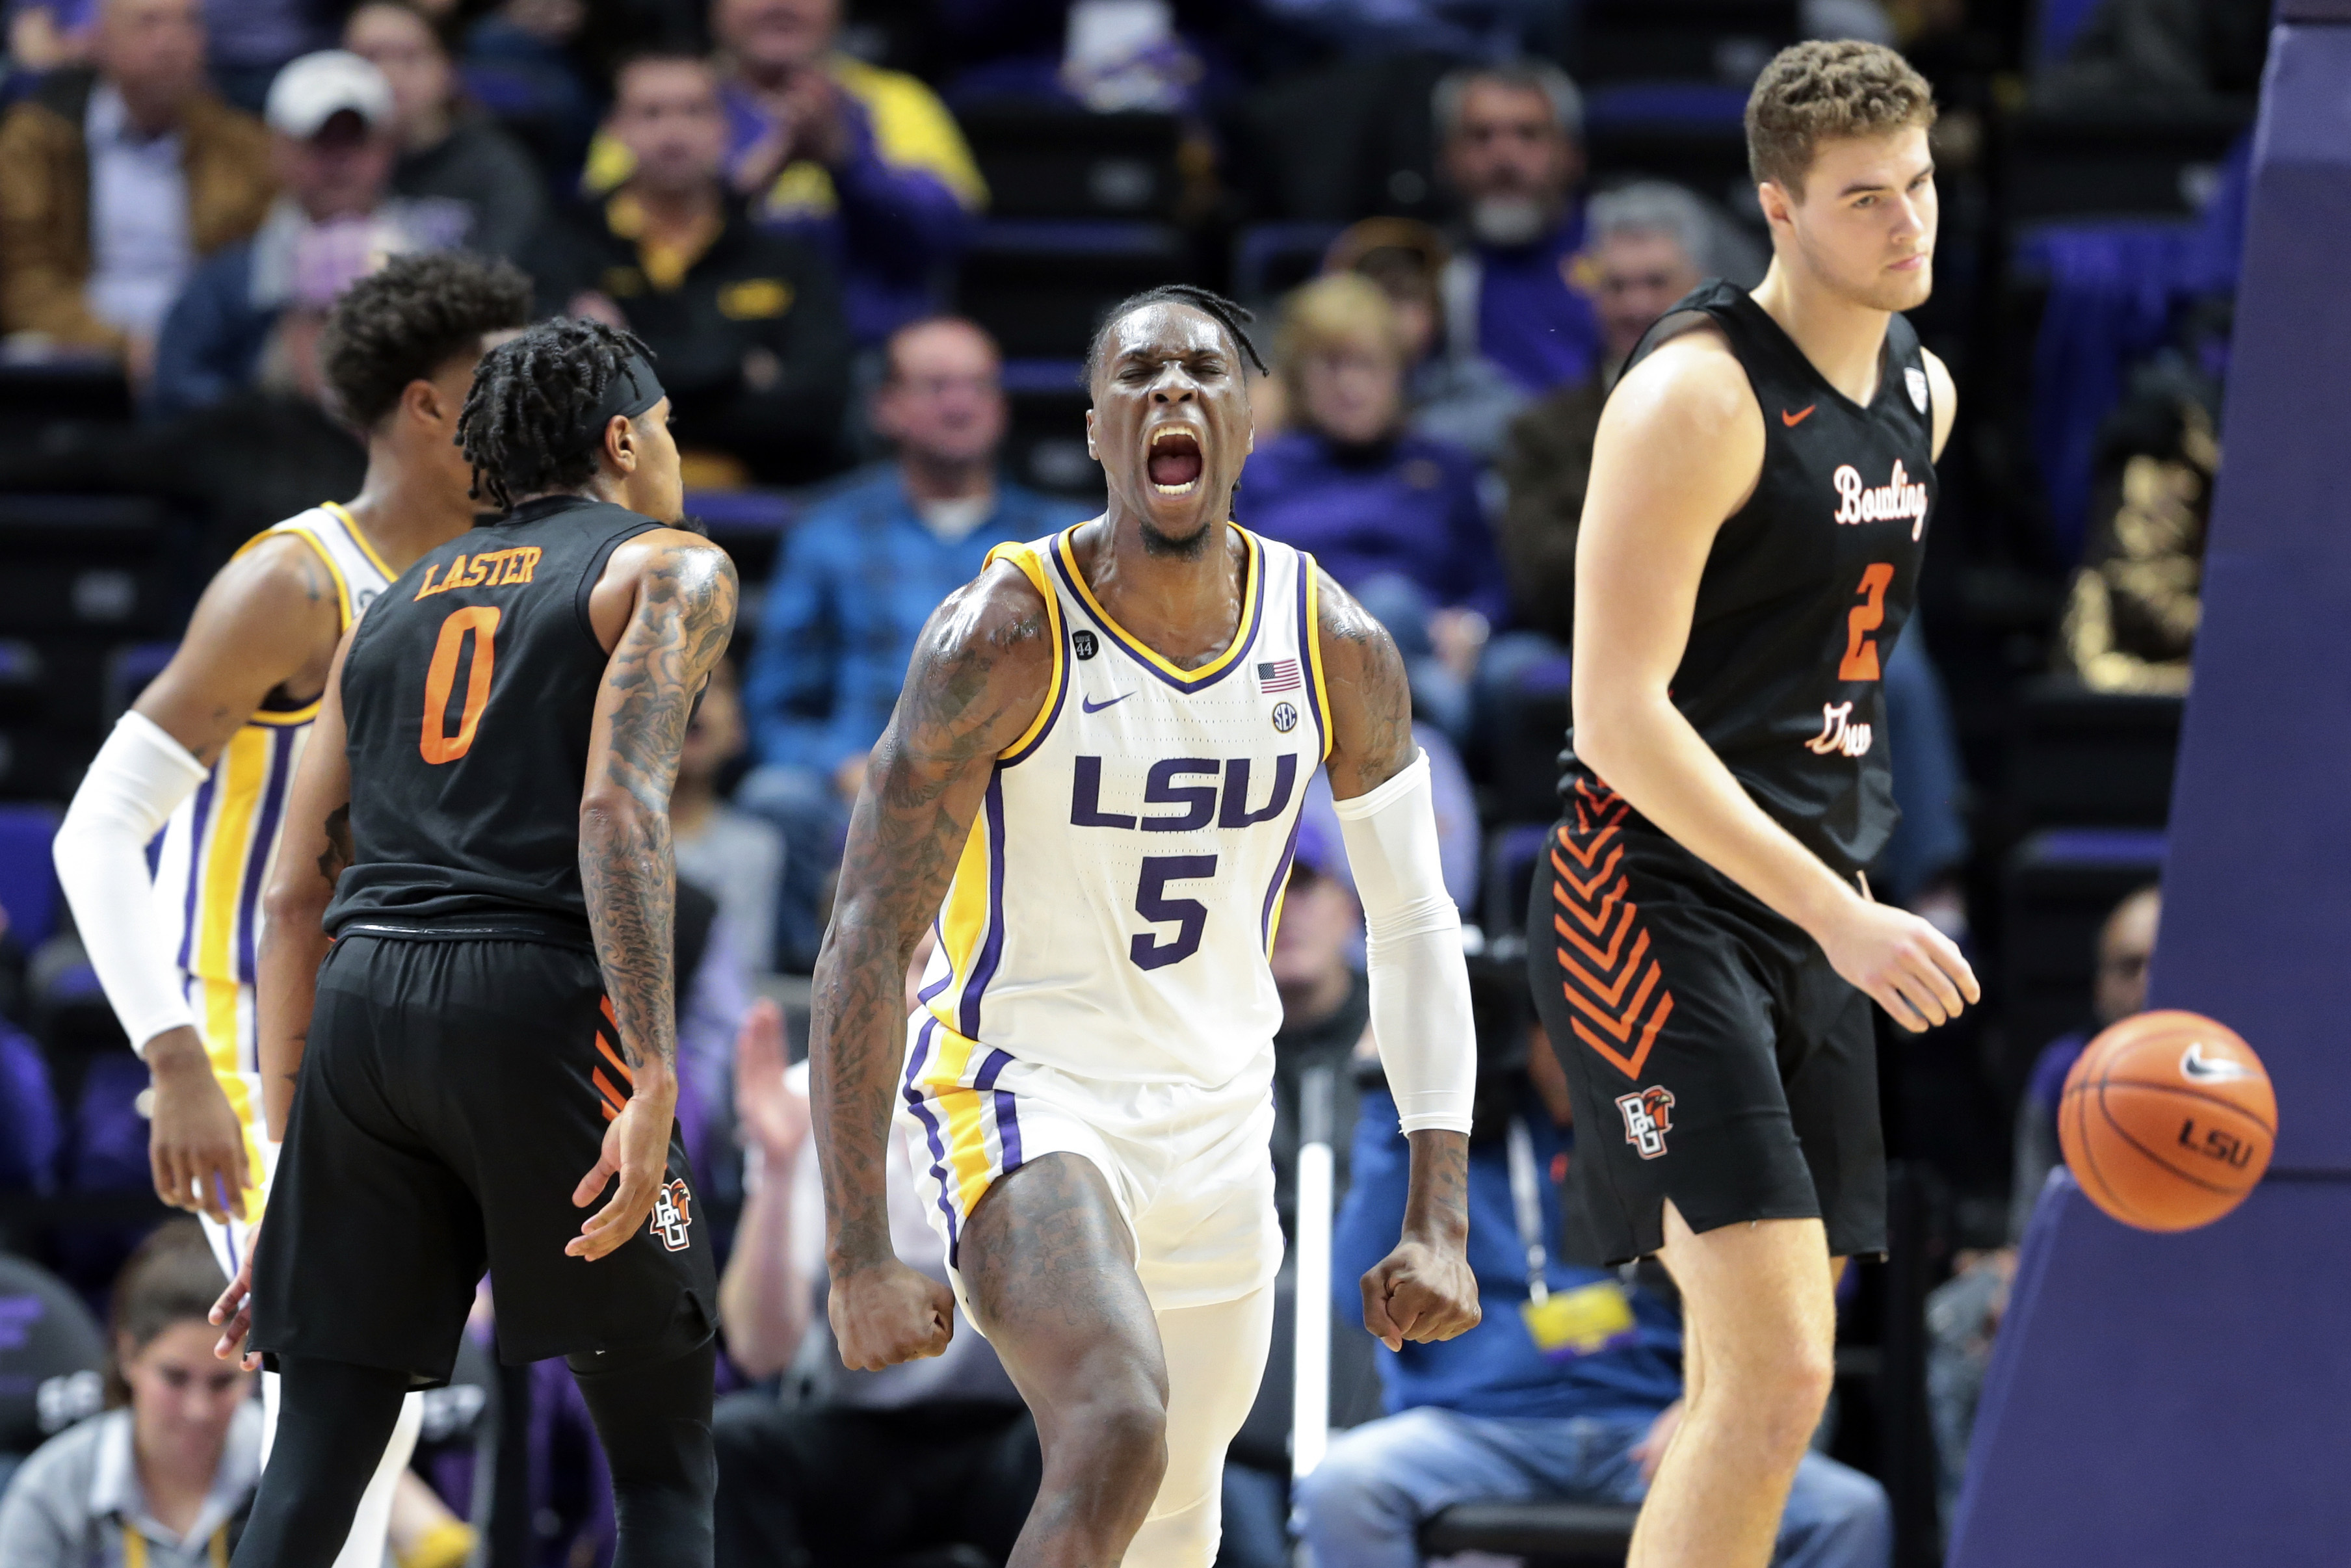 No. 22 LSU opens season with 88-79 win over Bowling Green